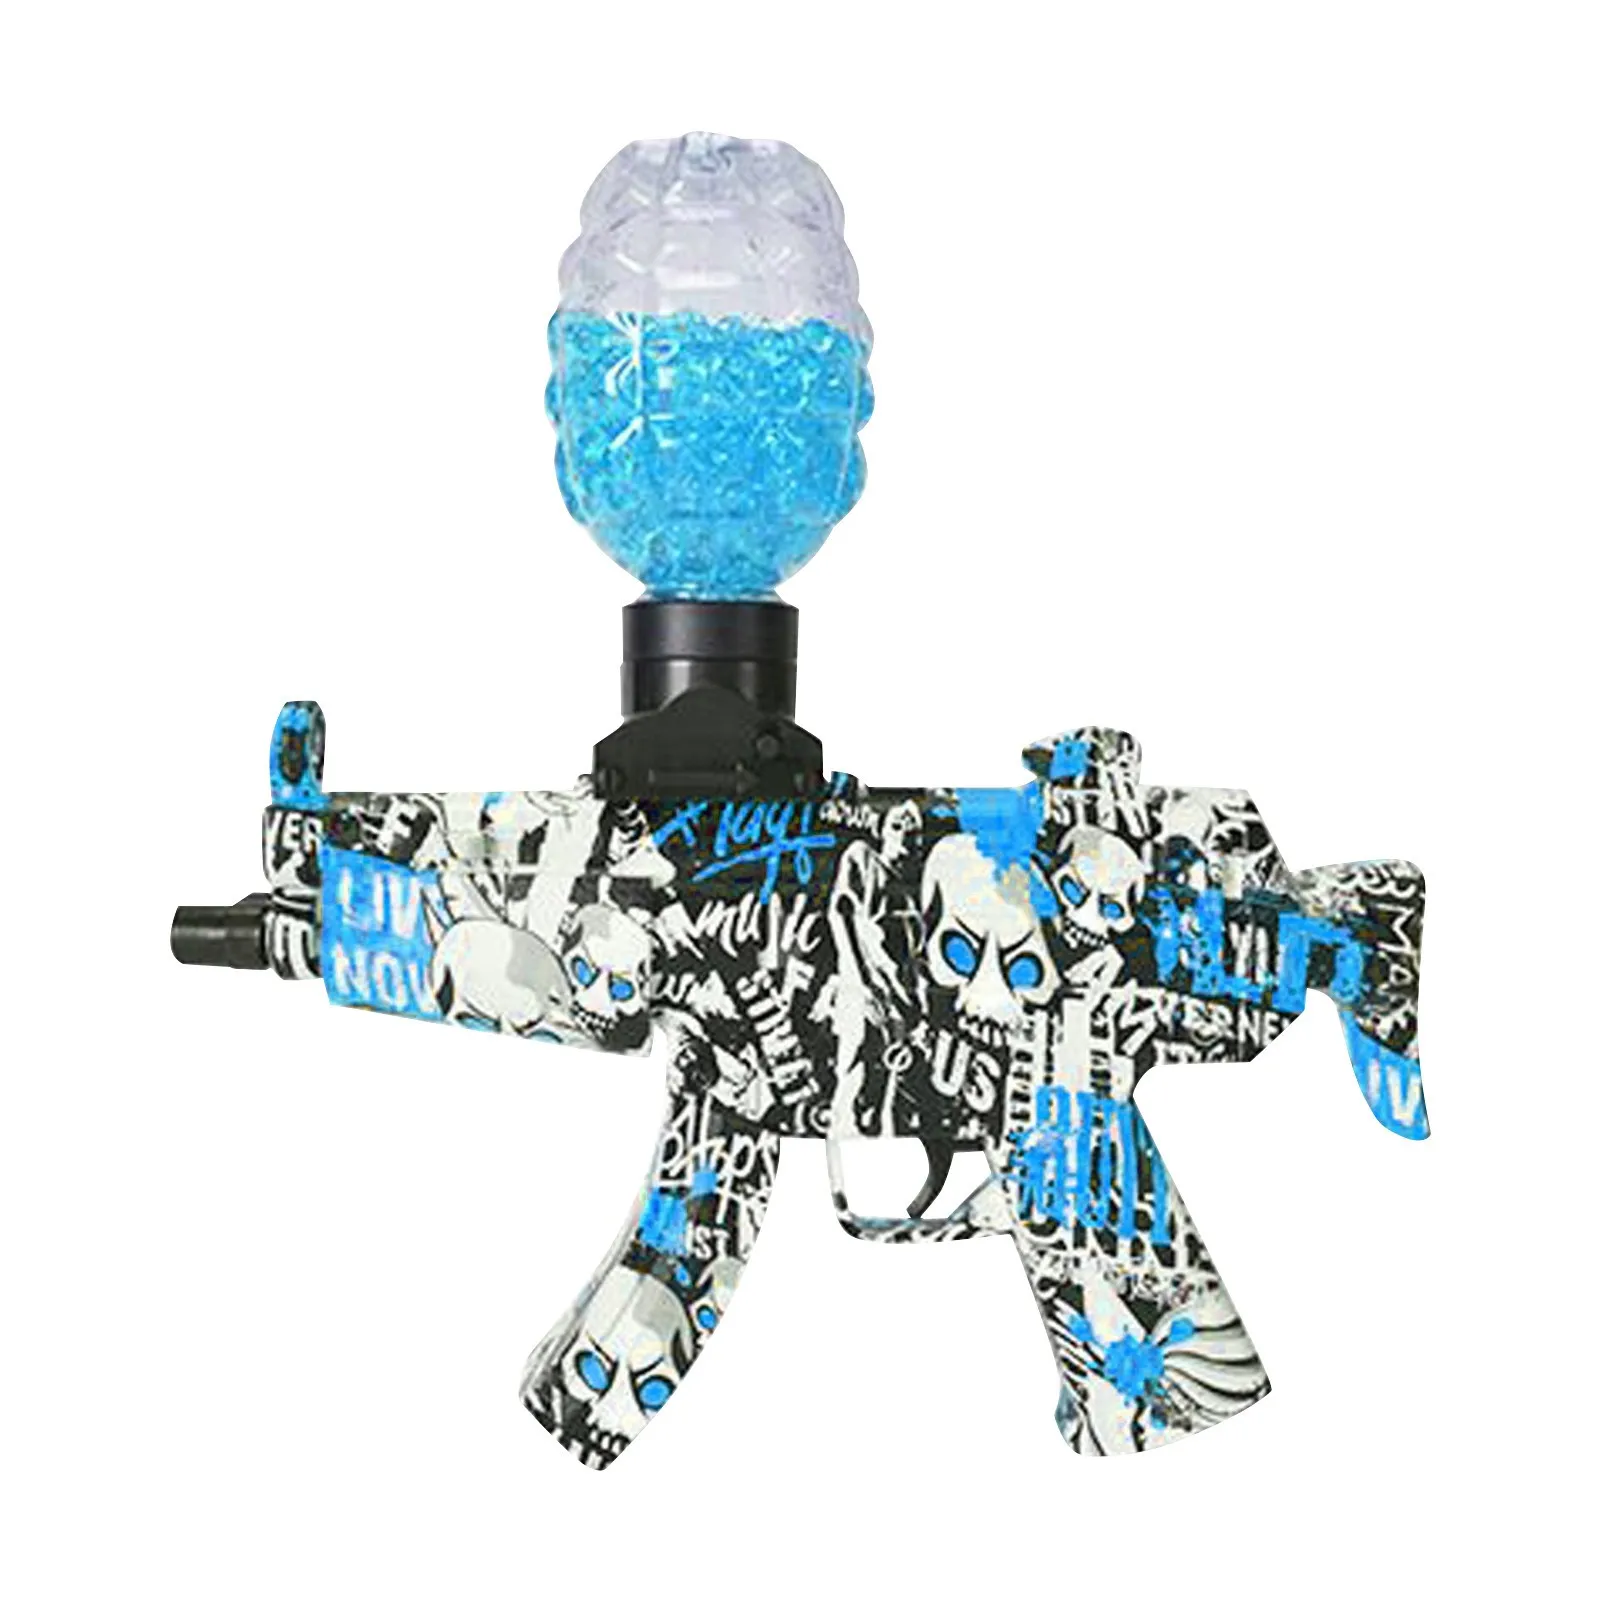 1set Gel Ball Blaster Electric Splatter Ball Blaster Fun And Outdoor Team Shooting Games Birthday Gifts With 1000 Hydrogel Balls